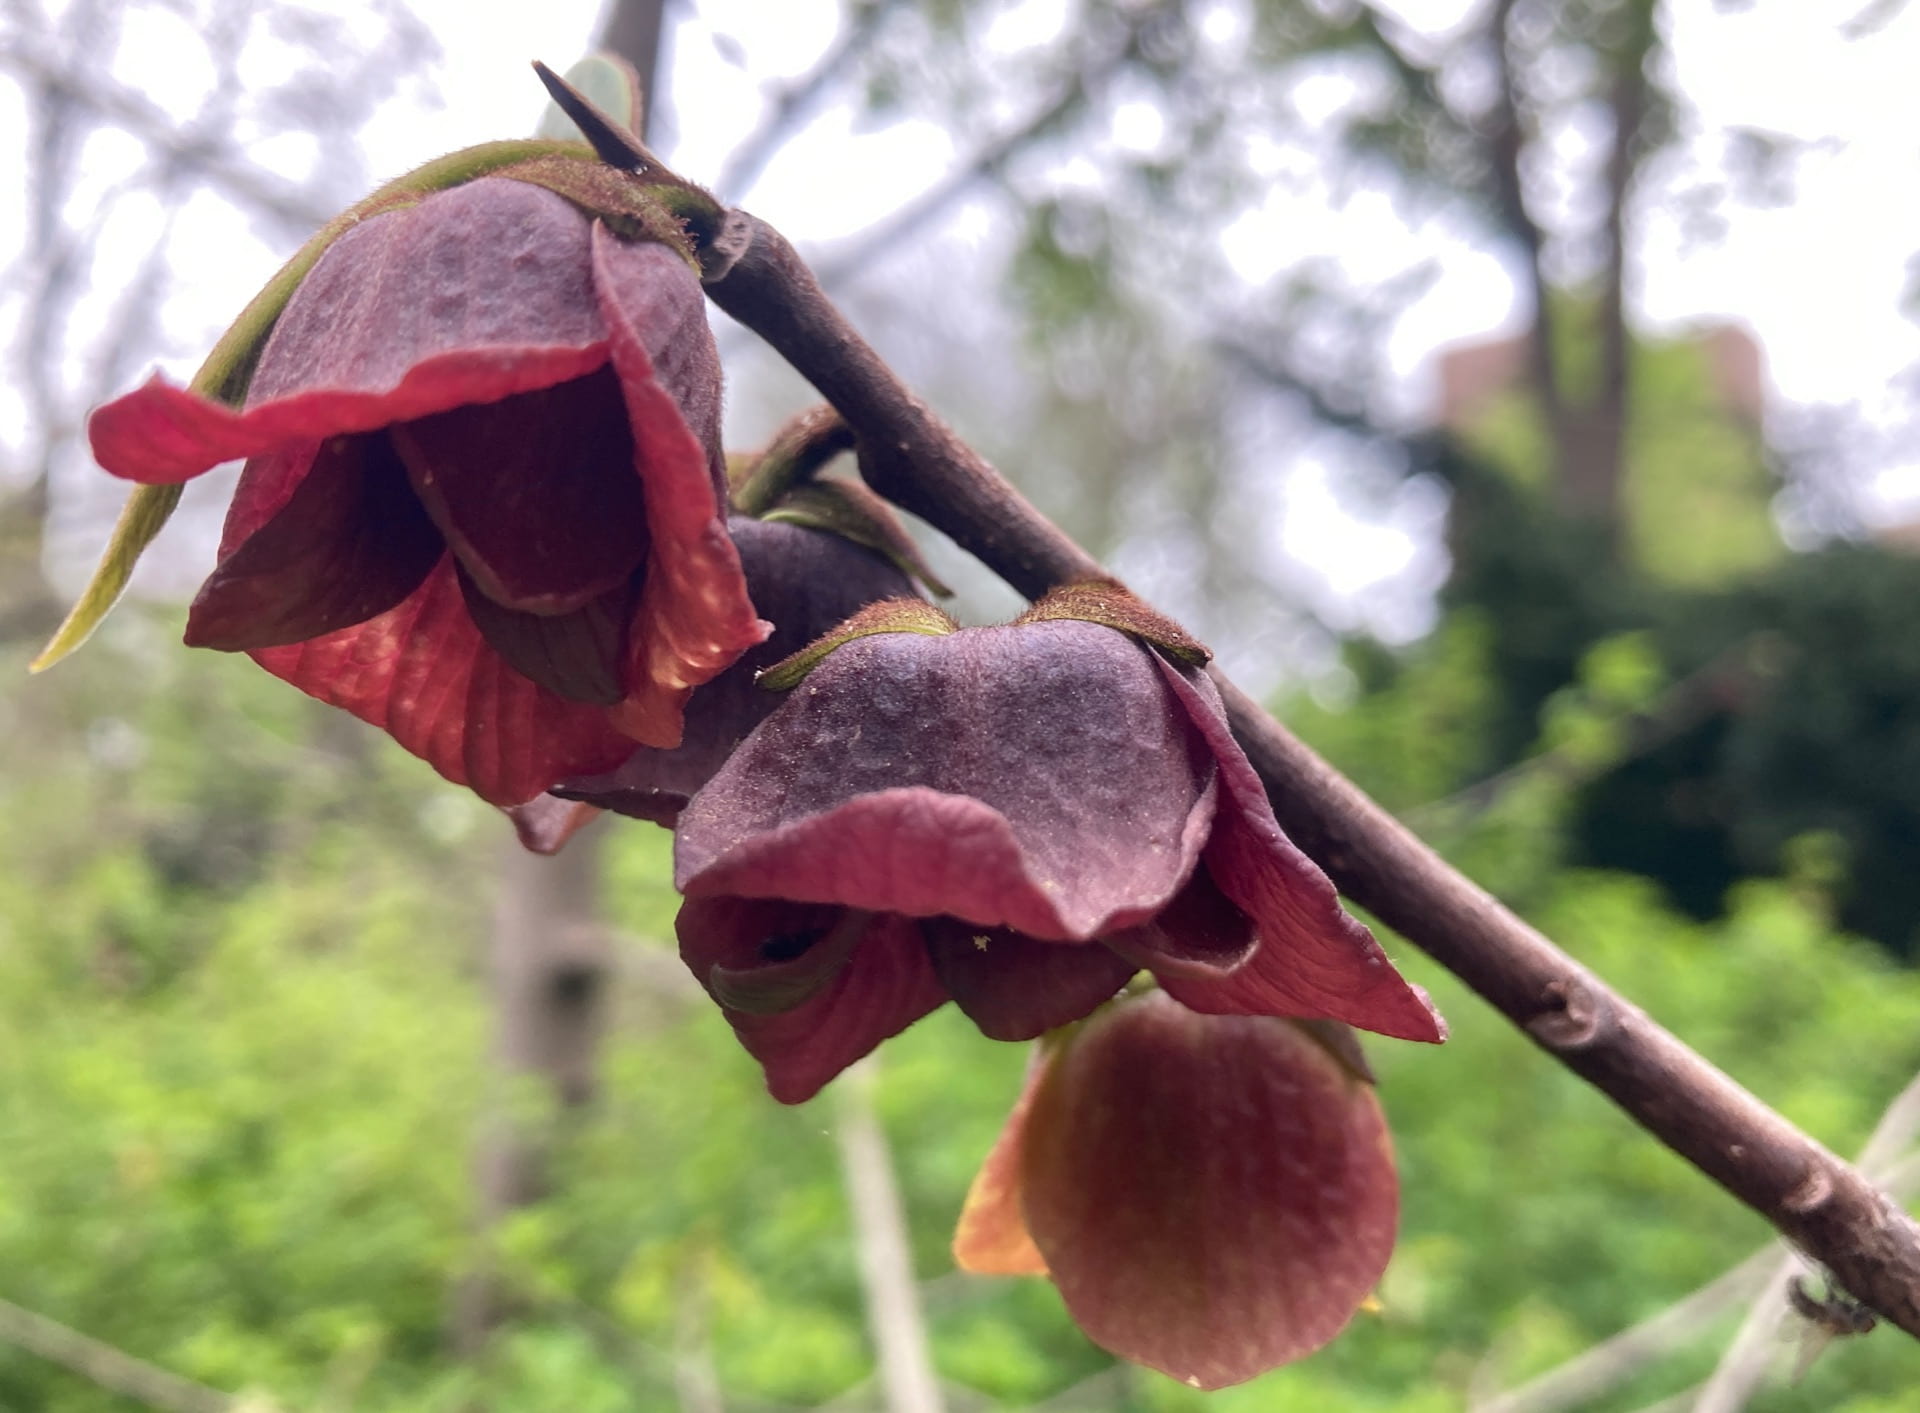 Asimina triloba, the pawpaw, has deep red flowers, because it is pollinated by carrion insects like flies and beetles, who mistake the flower for decomposing meat.